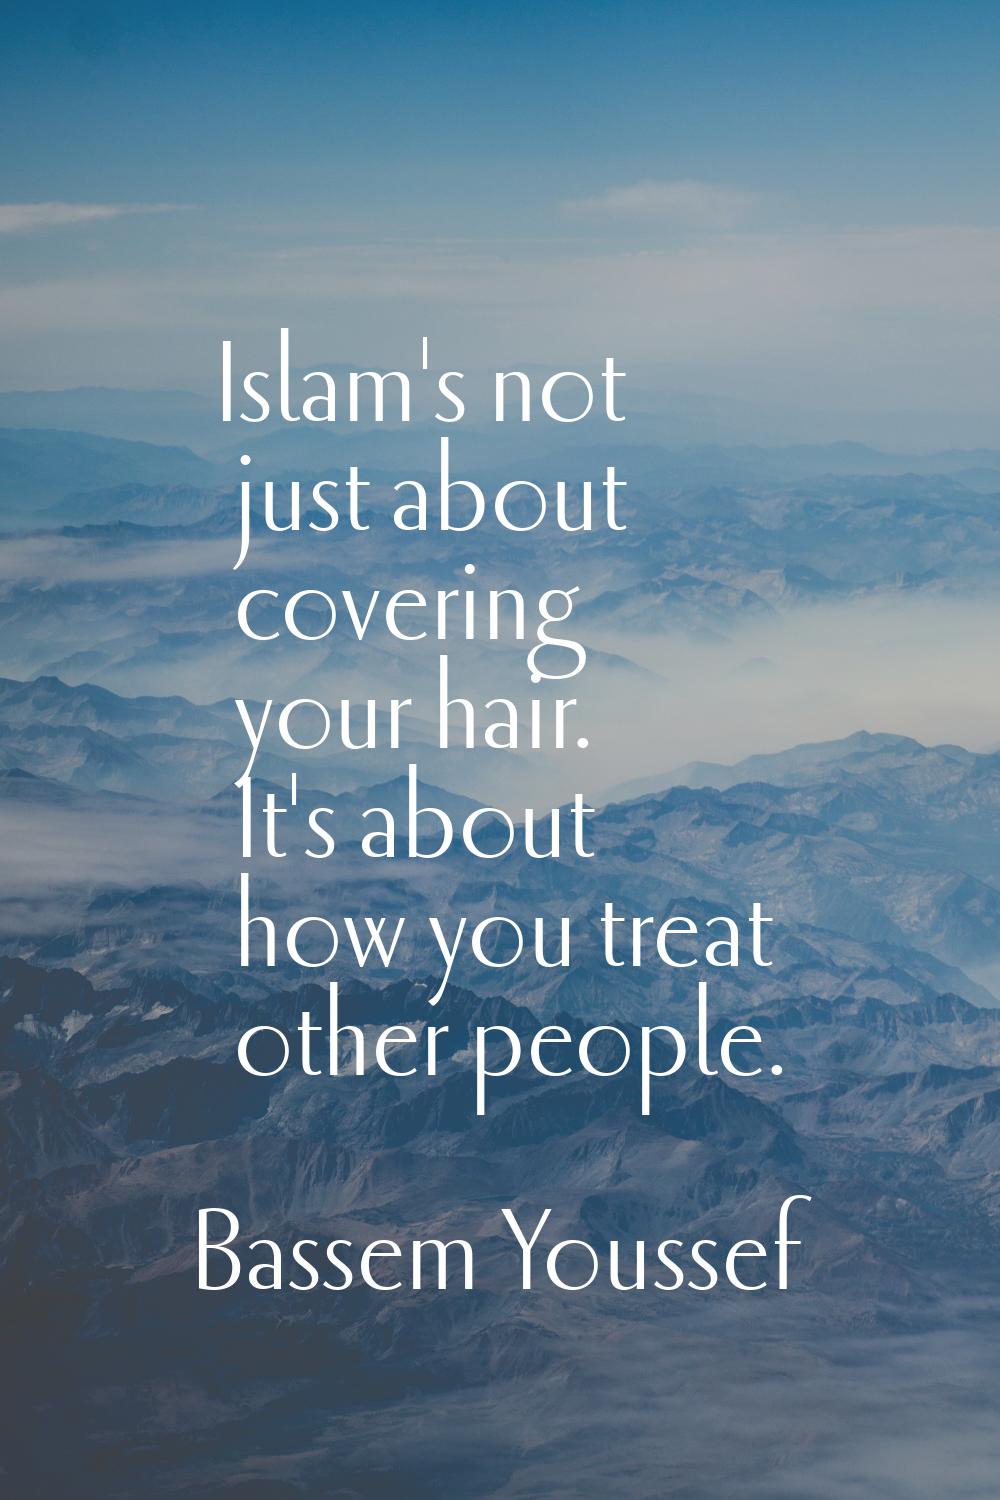 Islam's not just about covering your hair. It's about how you treat other people.